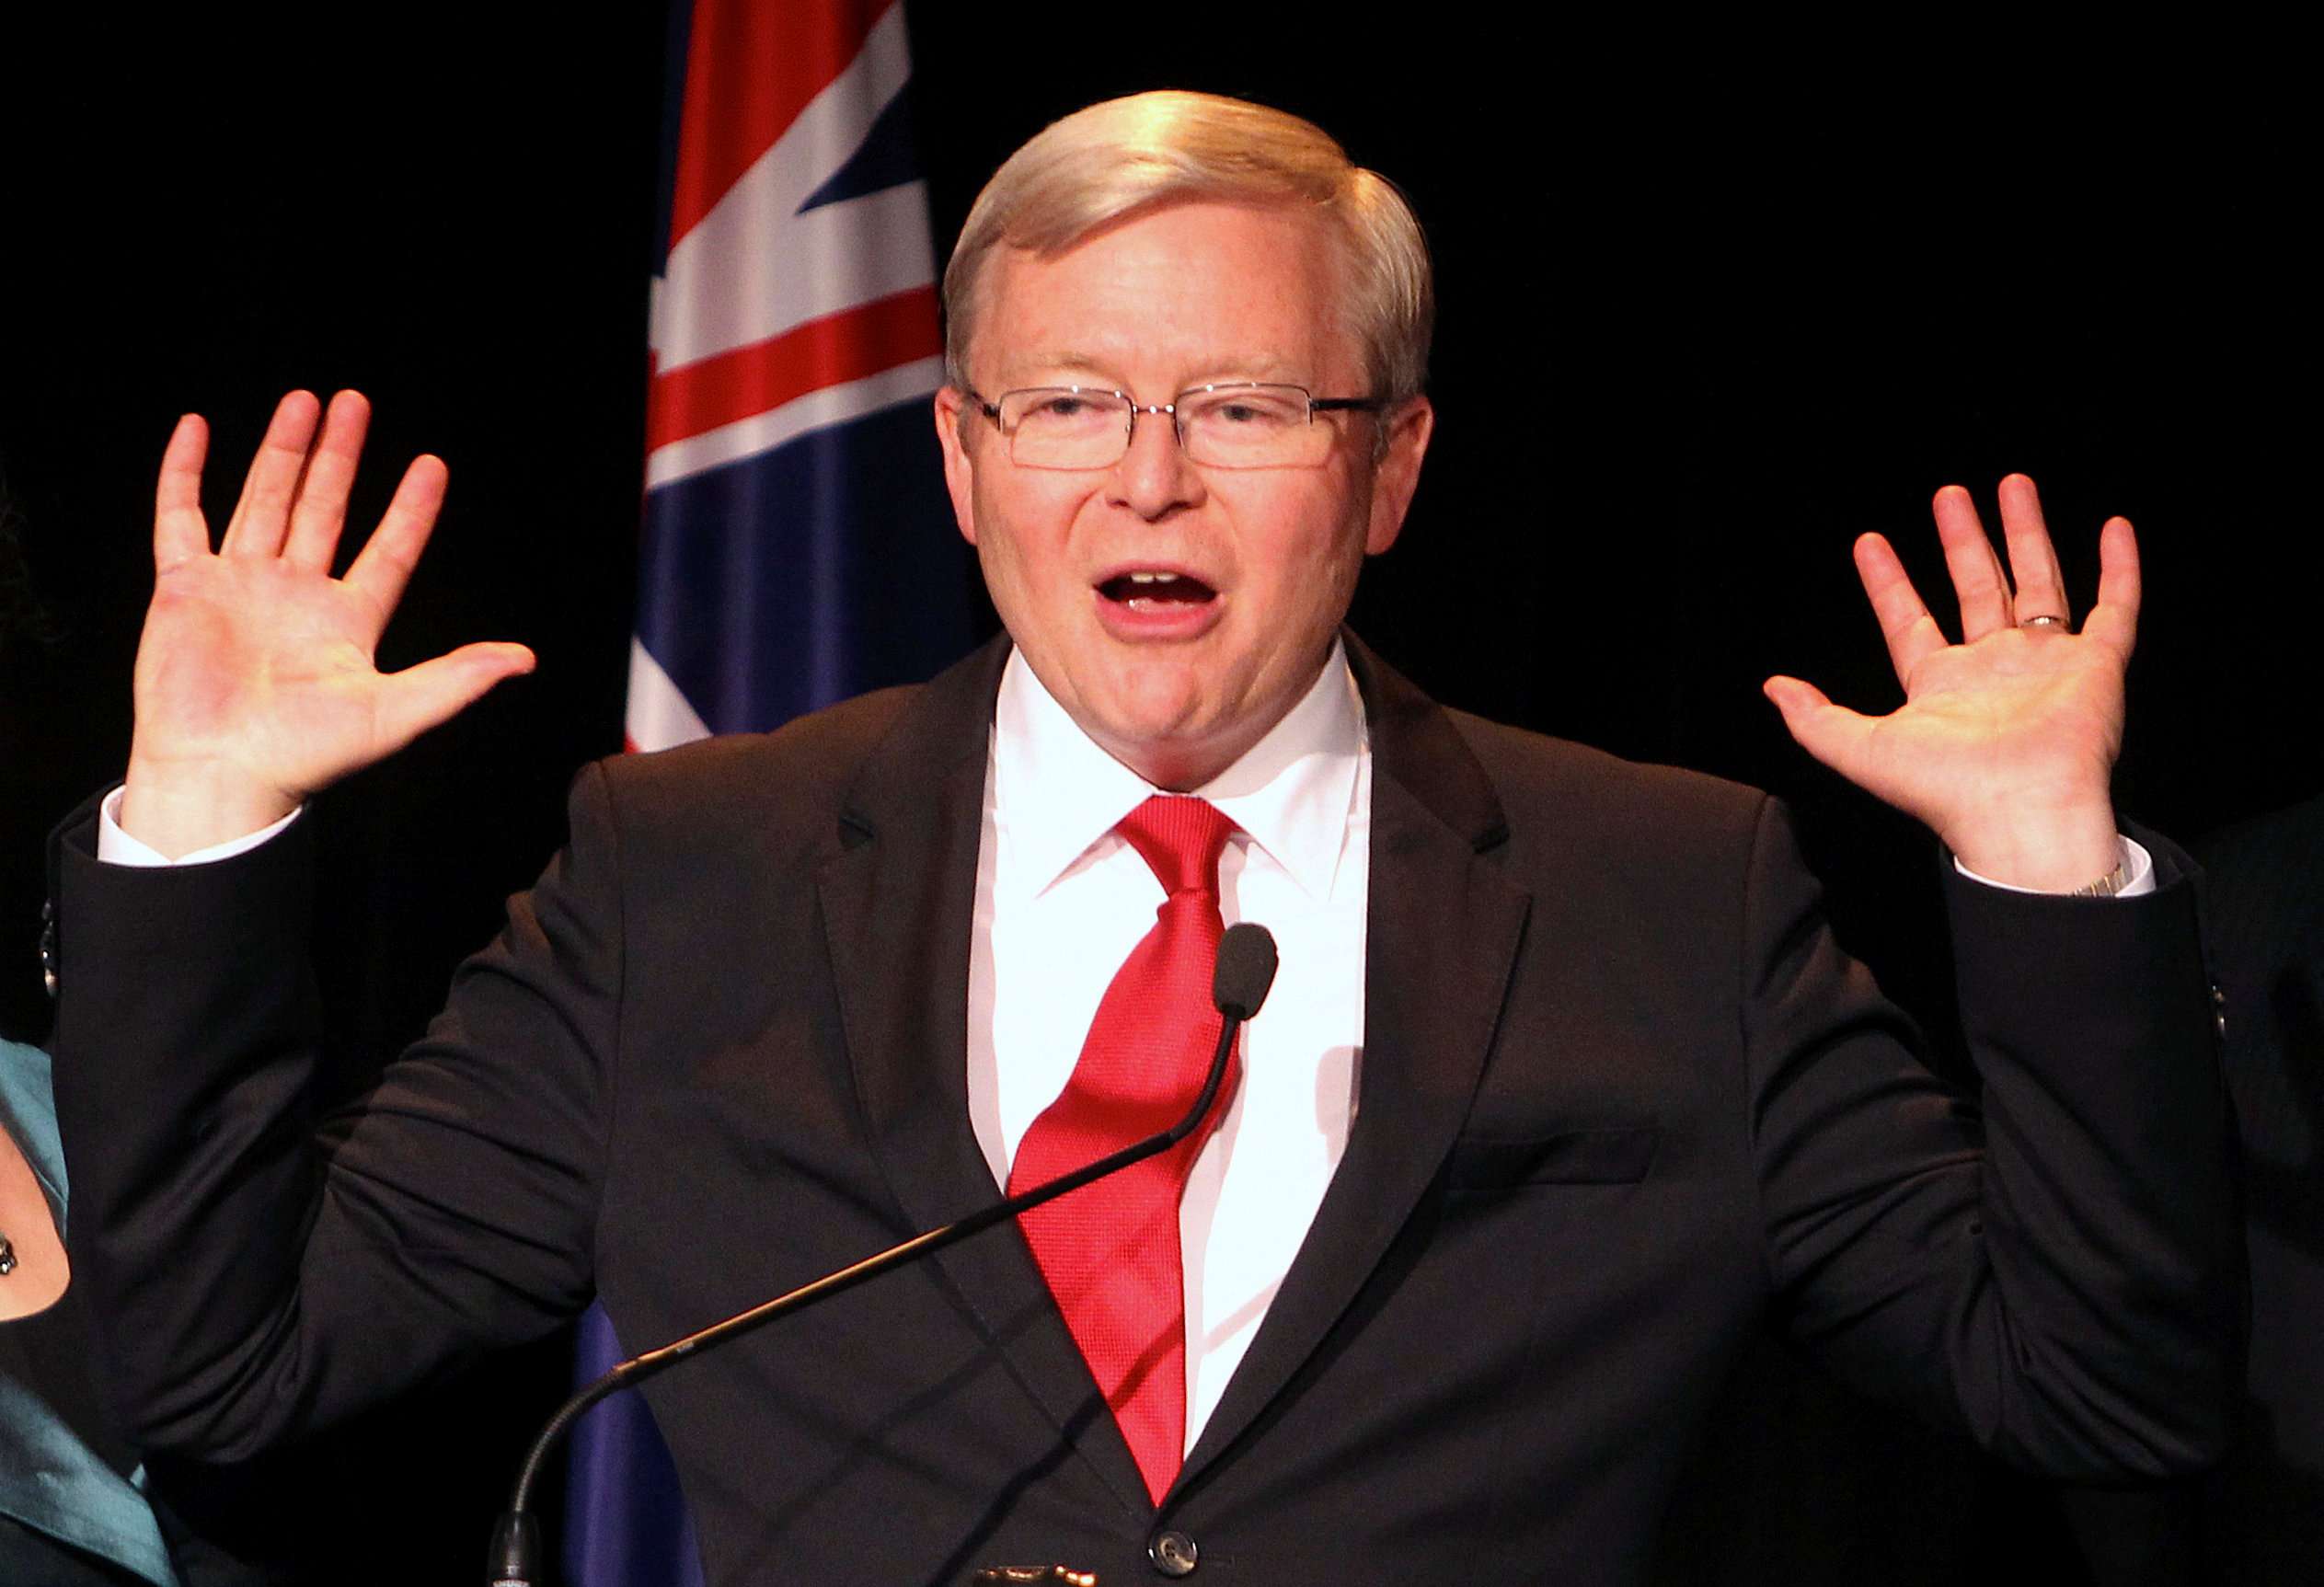 The Chinese-speaking Rudd, who is based in New York as head of the policy institute Asia Society, served as Labor prime minister from 2007 to 2010 and again in 2013. Photo: Reuters